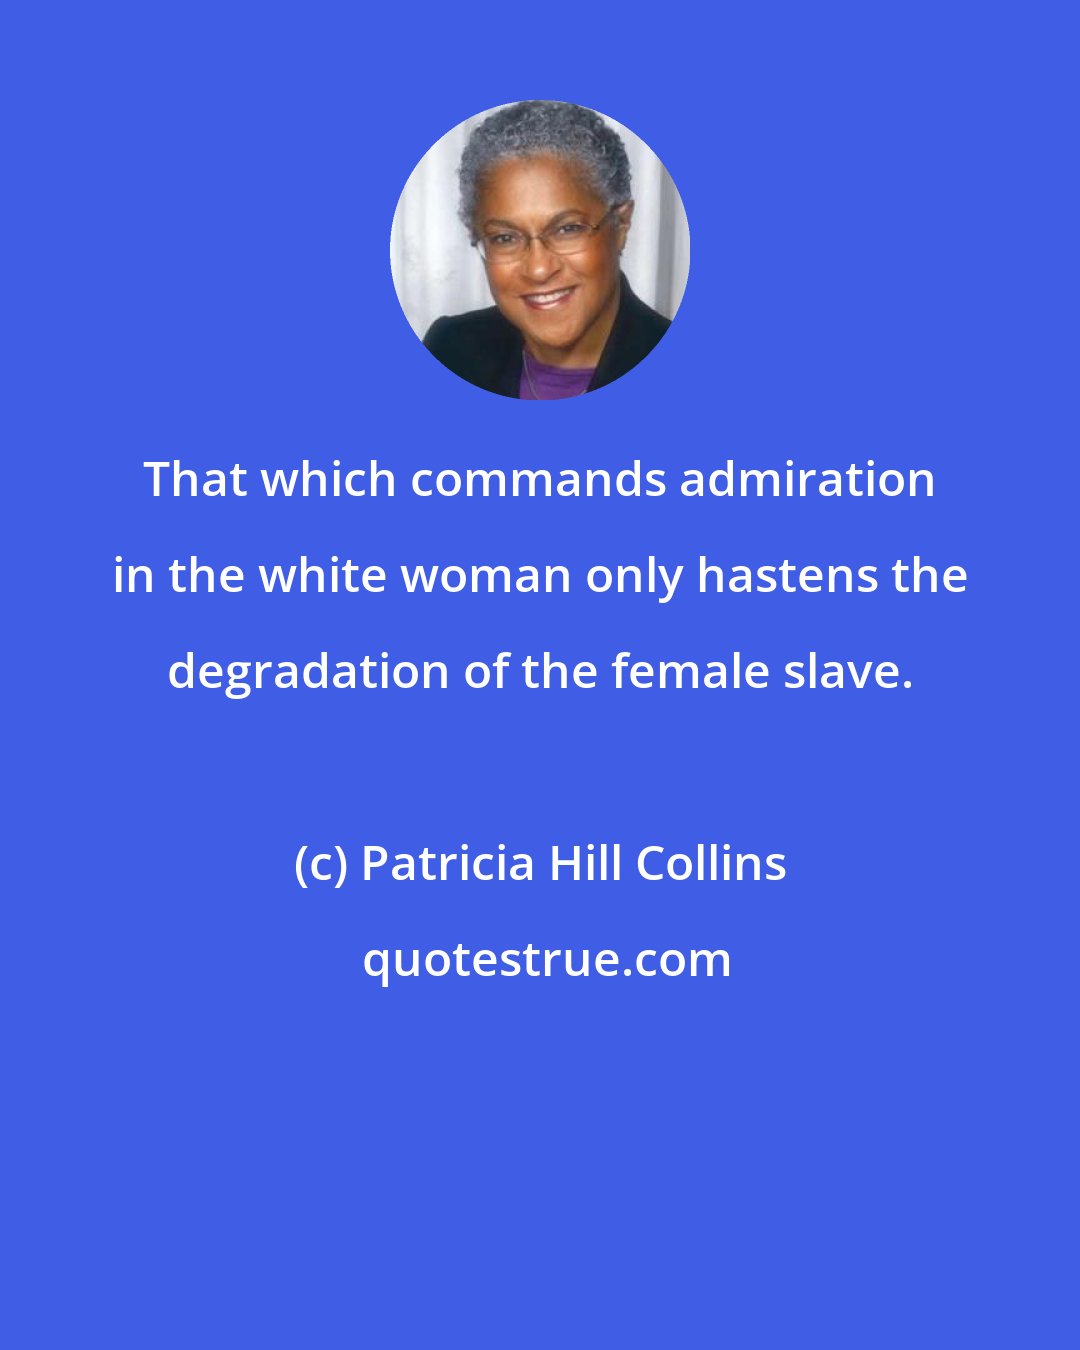 Patricia Hill Collins: That which commands admiration in the white woman only hastens the degradation of the female slave.